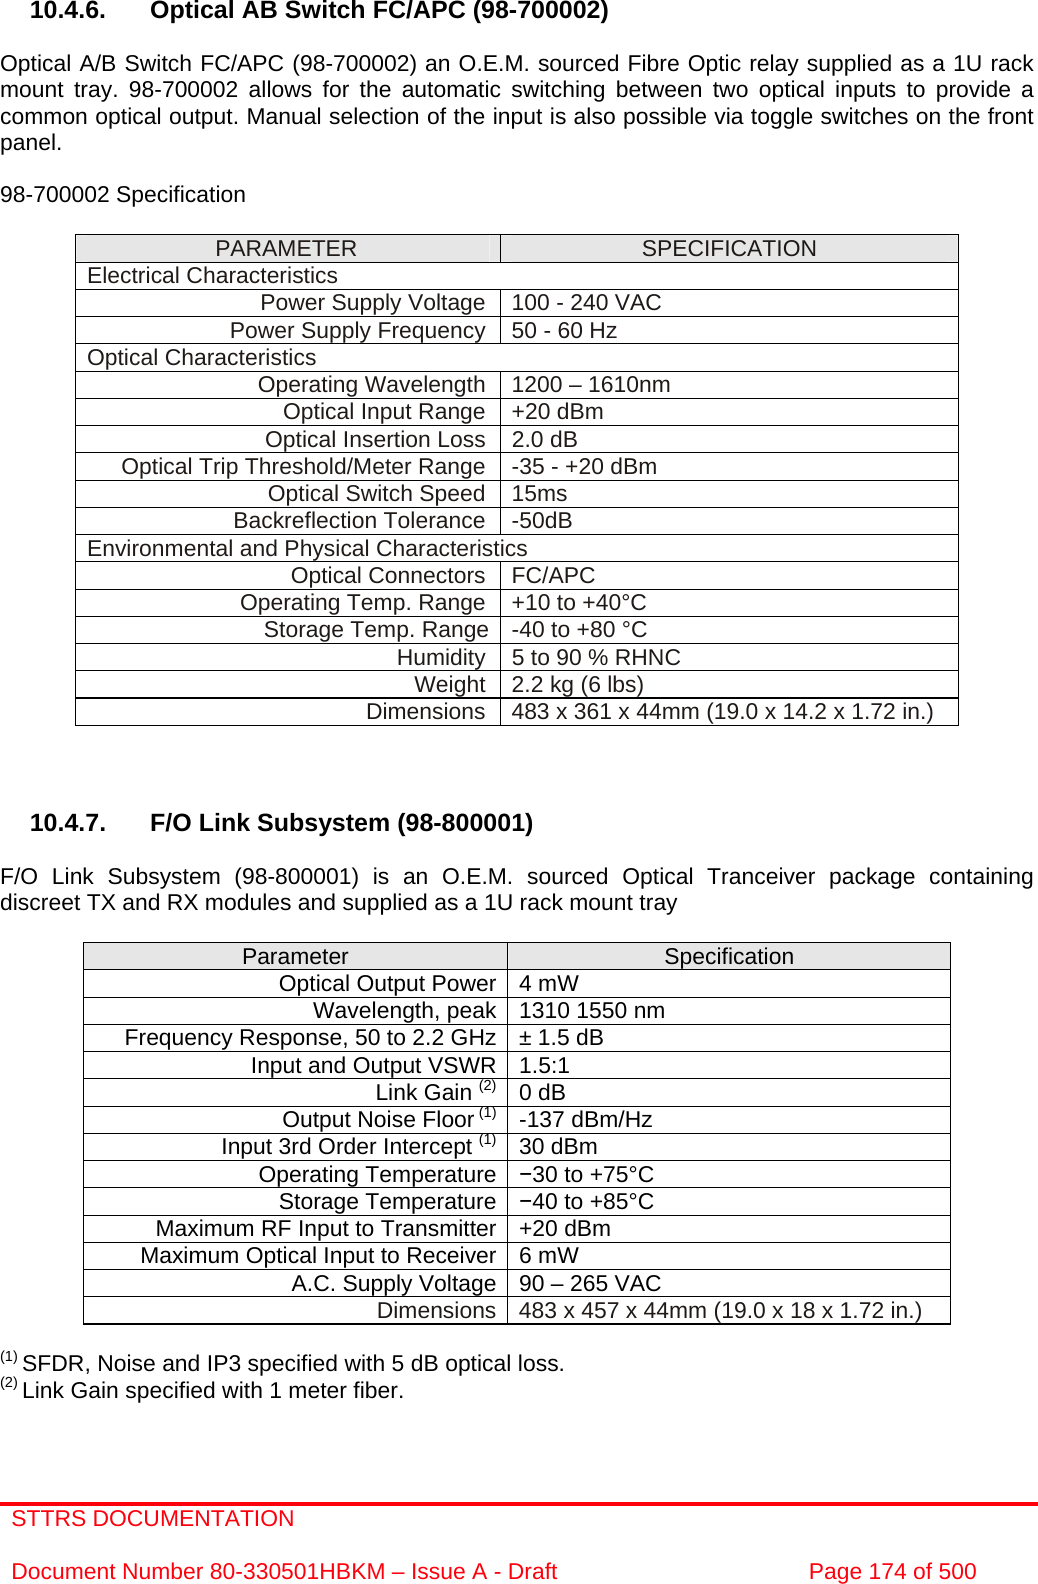 STTRS DOCUMENTATION  Document Number 80-330501HBKM – Issue A - Draft  Page 174 of 500     10.4.6.  Optical AB Switch FC/APC (98-700002)   Optical A/B Switch FC/APC (98-700002) an O.E.M. sourced Fibre Optic relay supplied as a 1U rack mount tray. 98-700002 allows for the automatic switching between two optical inputs to provide a common optical output. Manual selection of the input is also possible via toggle switches on the front panel.  98-700002 Specification   PARAMETER  SPECIFICATION Electrical Characteristics Power Supply Voltage  100 - 240 VAC Power Supply Frequency 50 - 60 Hz Optical Characteristics Operating Wavelength  1200 – 1610nm Optical Input Range  +20 dBm Optical Insertion Loss  2.0 dB Optical Trip Threshold/Meter Range  -35 - +20 dBm Optical Switch Speed  15ms Backreflection Tolerance  -50dB Environmental and Physical Characteristics Optical Connectors  FC/APC Operating Temp. Range  +10 to +40°C Storage Temp. Range  -40 to +80 °C   Humidity  5 to 90 % RHNC Weight  2.2 kg (6 lbs) Dimensions  483 x 361 x 44mm (19.0 x 14.2 x 1.72 in.)    10.4.7.  F/O Link Subsystem (98-800001)  F/O Link Subsystem (98-800001) is an O.E.M. sourced Optical Tranceiver package containing discreet TX and RX modules and supplied as a 1U rack mount tray   Parameter  Specification Optical Output Power 4 mW Wavelength, peak 1310 1550 nm  Frequency Response, 50 to 2.2 GHz ± 1.5 dB Input and Output VSWR 1.5:1  Link Gain (2) 0 dB Output Noise Floor (1) -137 dBm/Hz Input 3rd Order Intercept (1) 30 dBm Operating Temperature  −30 to +75°C Storage Temperature −40 to +85°C Maximum RF Input to Transmitter +20 dBm Maximum Optical Input to Receiver 6 mW A.C. Supply Voltage 90 – 265 VAC Dimensions 483 x 457 x 44mm (19.0 x 18 x 1.72 in.)  (1) SFDR, Noise and IP3 specified with 5 dB optical loss. (2) Link Gain specified with 1 meter fiber.   